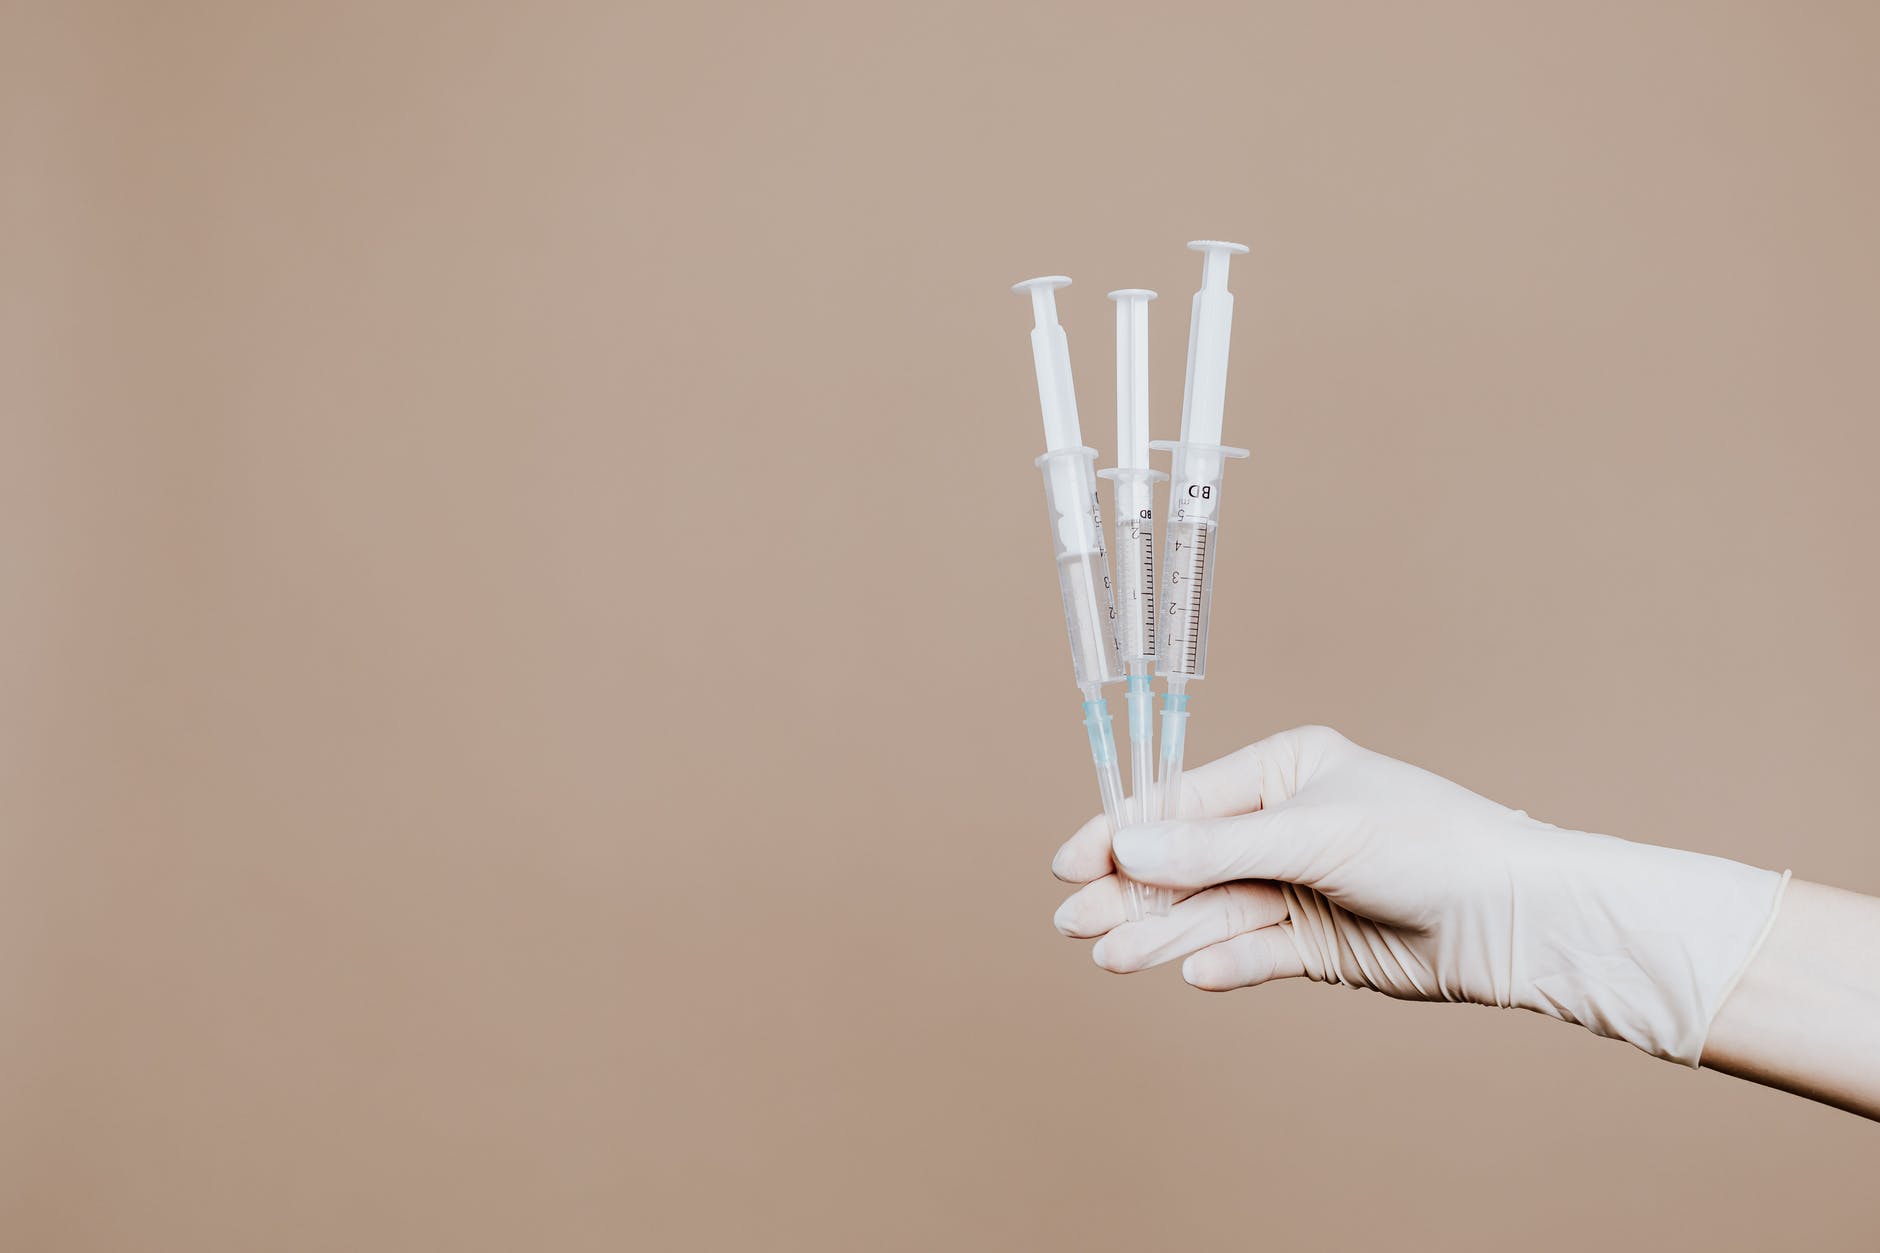 person holding three syringes with medicine